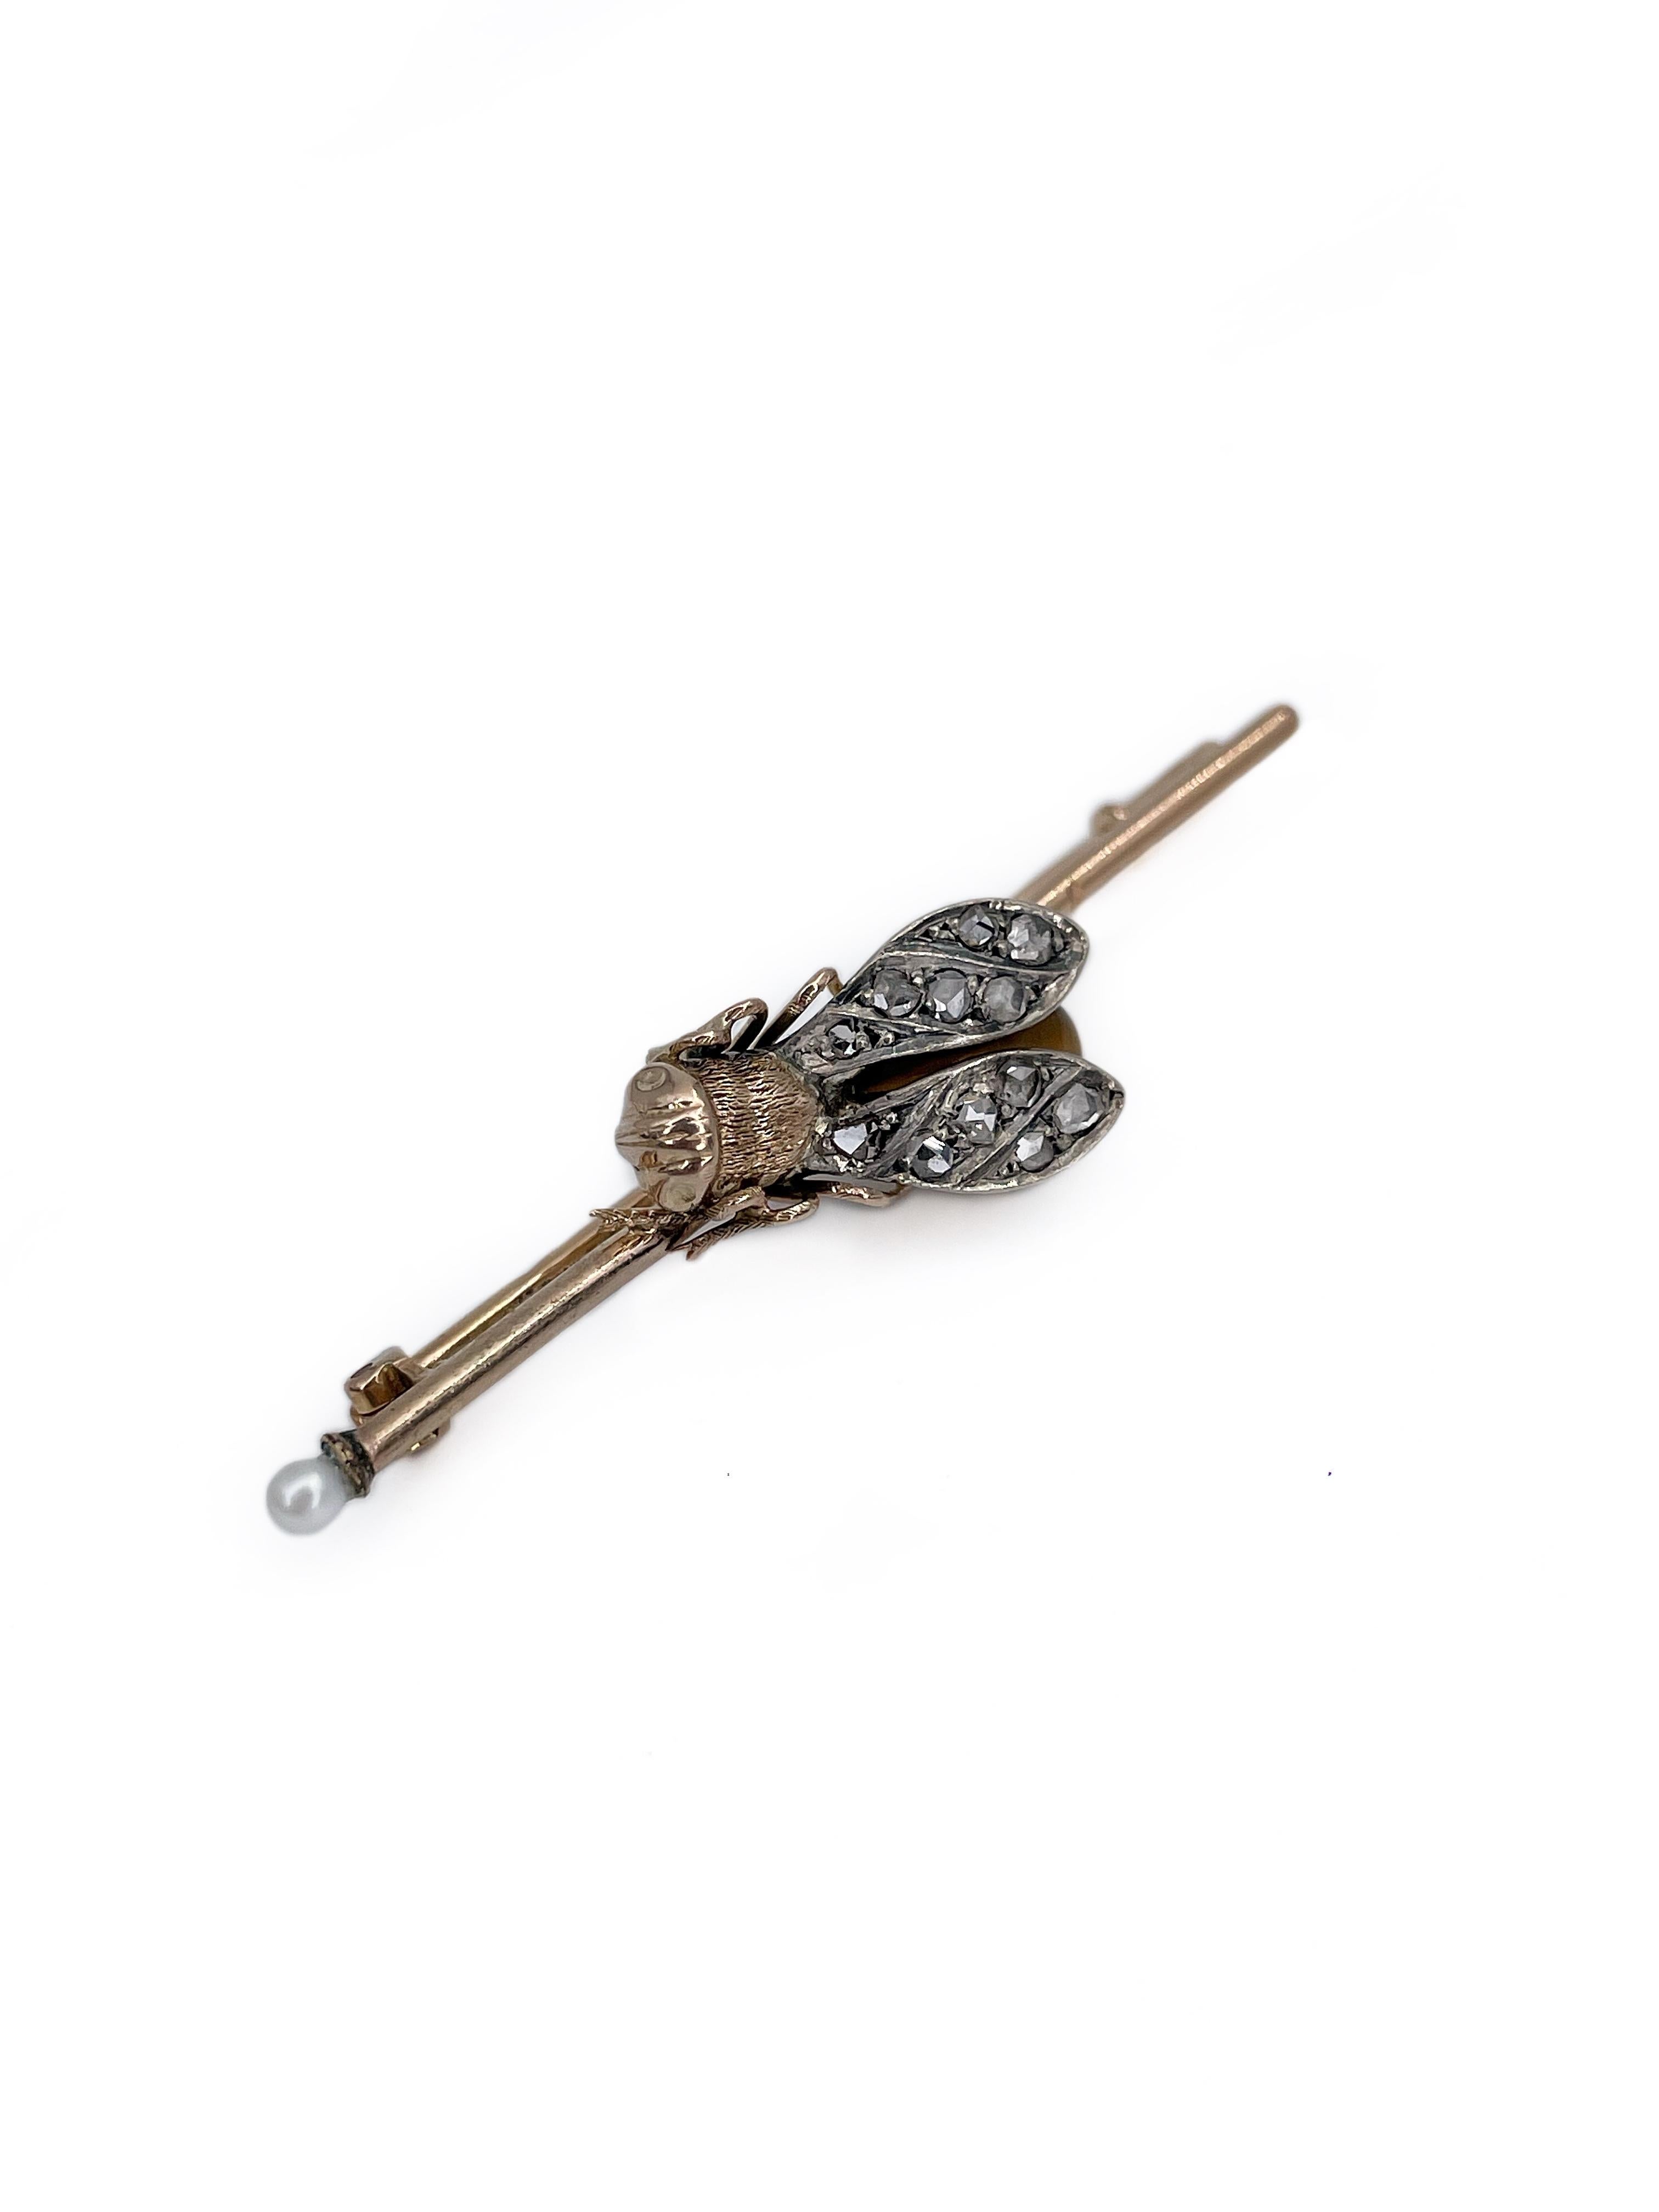 This is a lovely Victorian insect bar brooch. It depicts a fly or a bee. The piece is crafted in 14K gold and is adorned with 830 hallmark silver. It features:
- 1pc. cabochon cut tiger’s eye
- 12 pcs. rose cut diamonds: TW 0.16ct, RW-STW, VS-SI
- 1